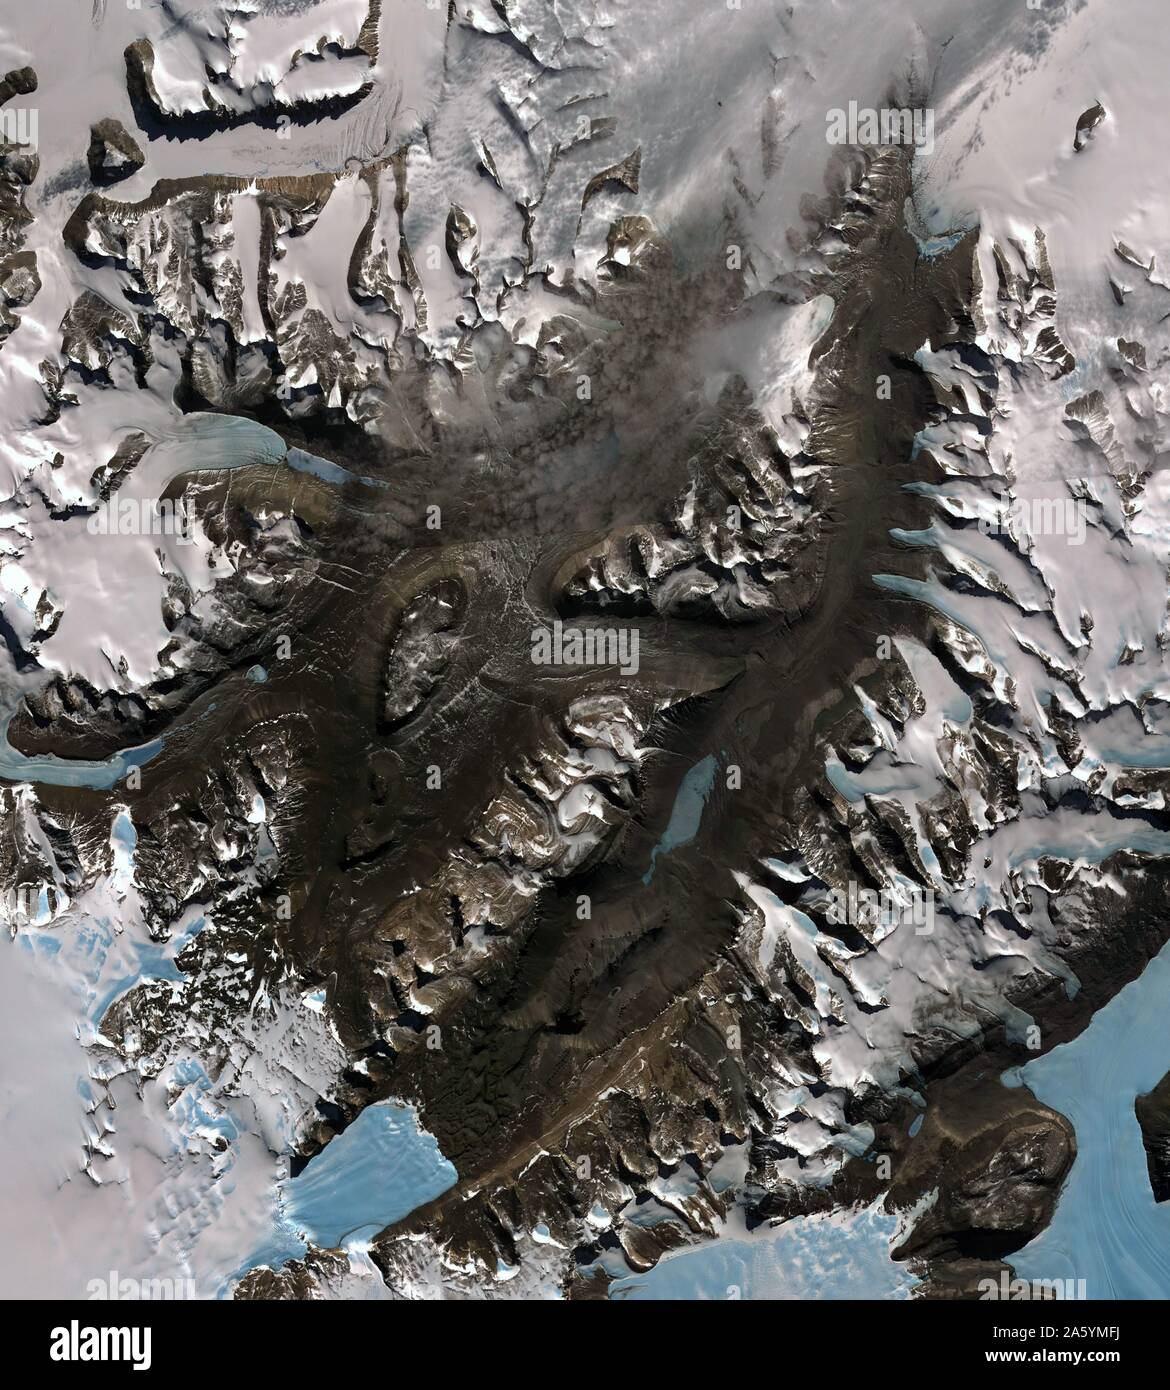 The McMurdo Dry Valleys are a row of valleys west of McMurdo Sound, Antarctica. They are so named because of their extremely low humidity and lack of snow and ice cover. December 8, 2002. Satellite image. Stock Photo